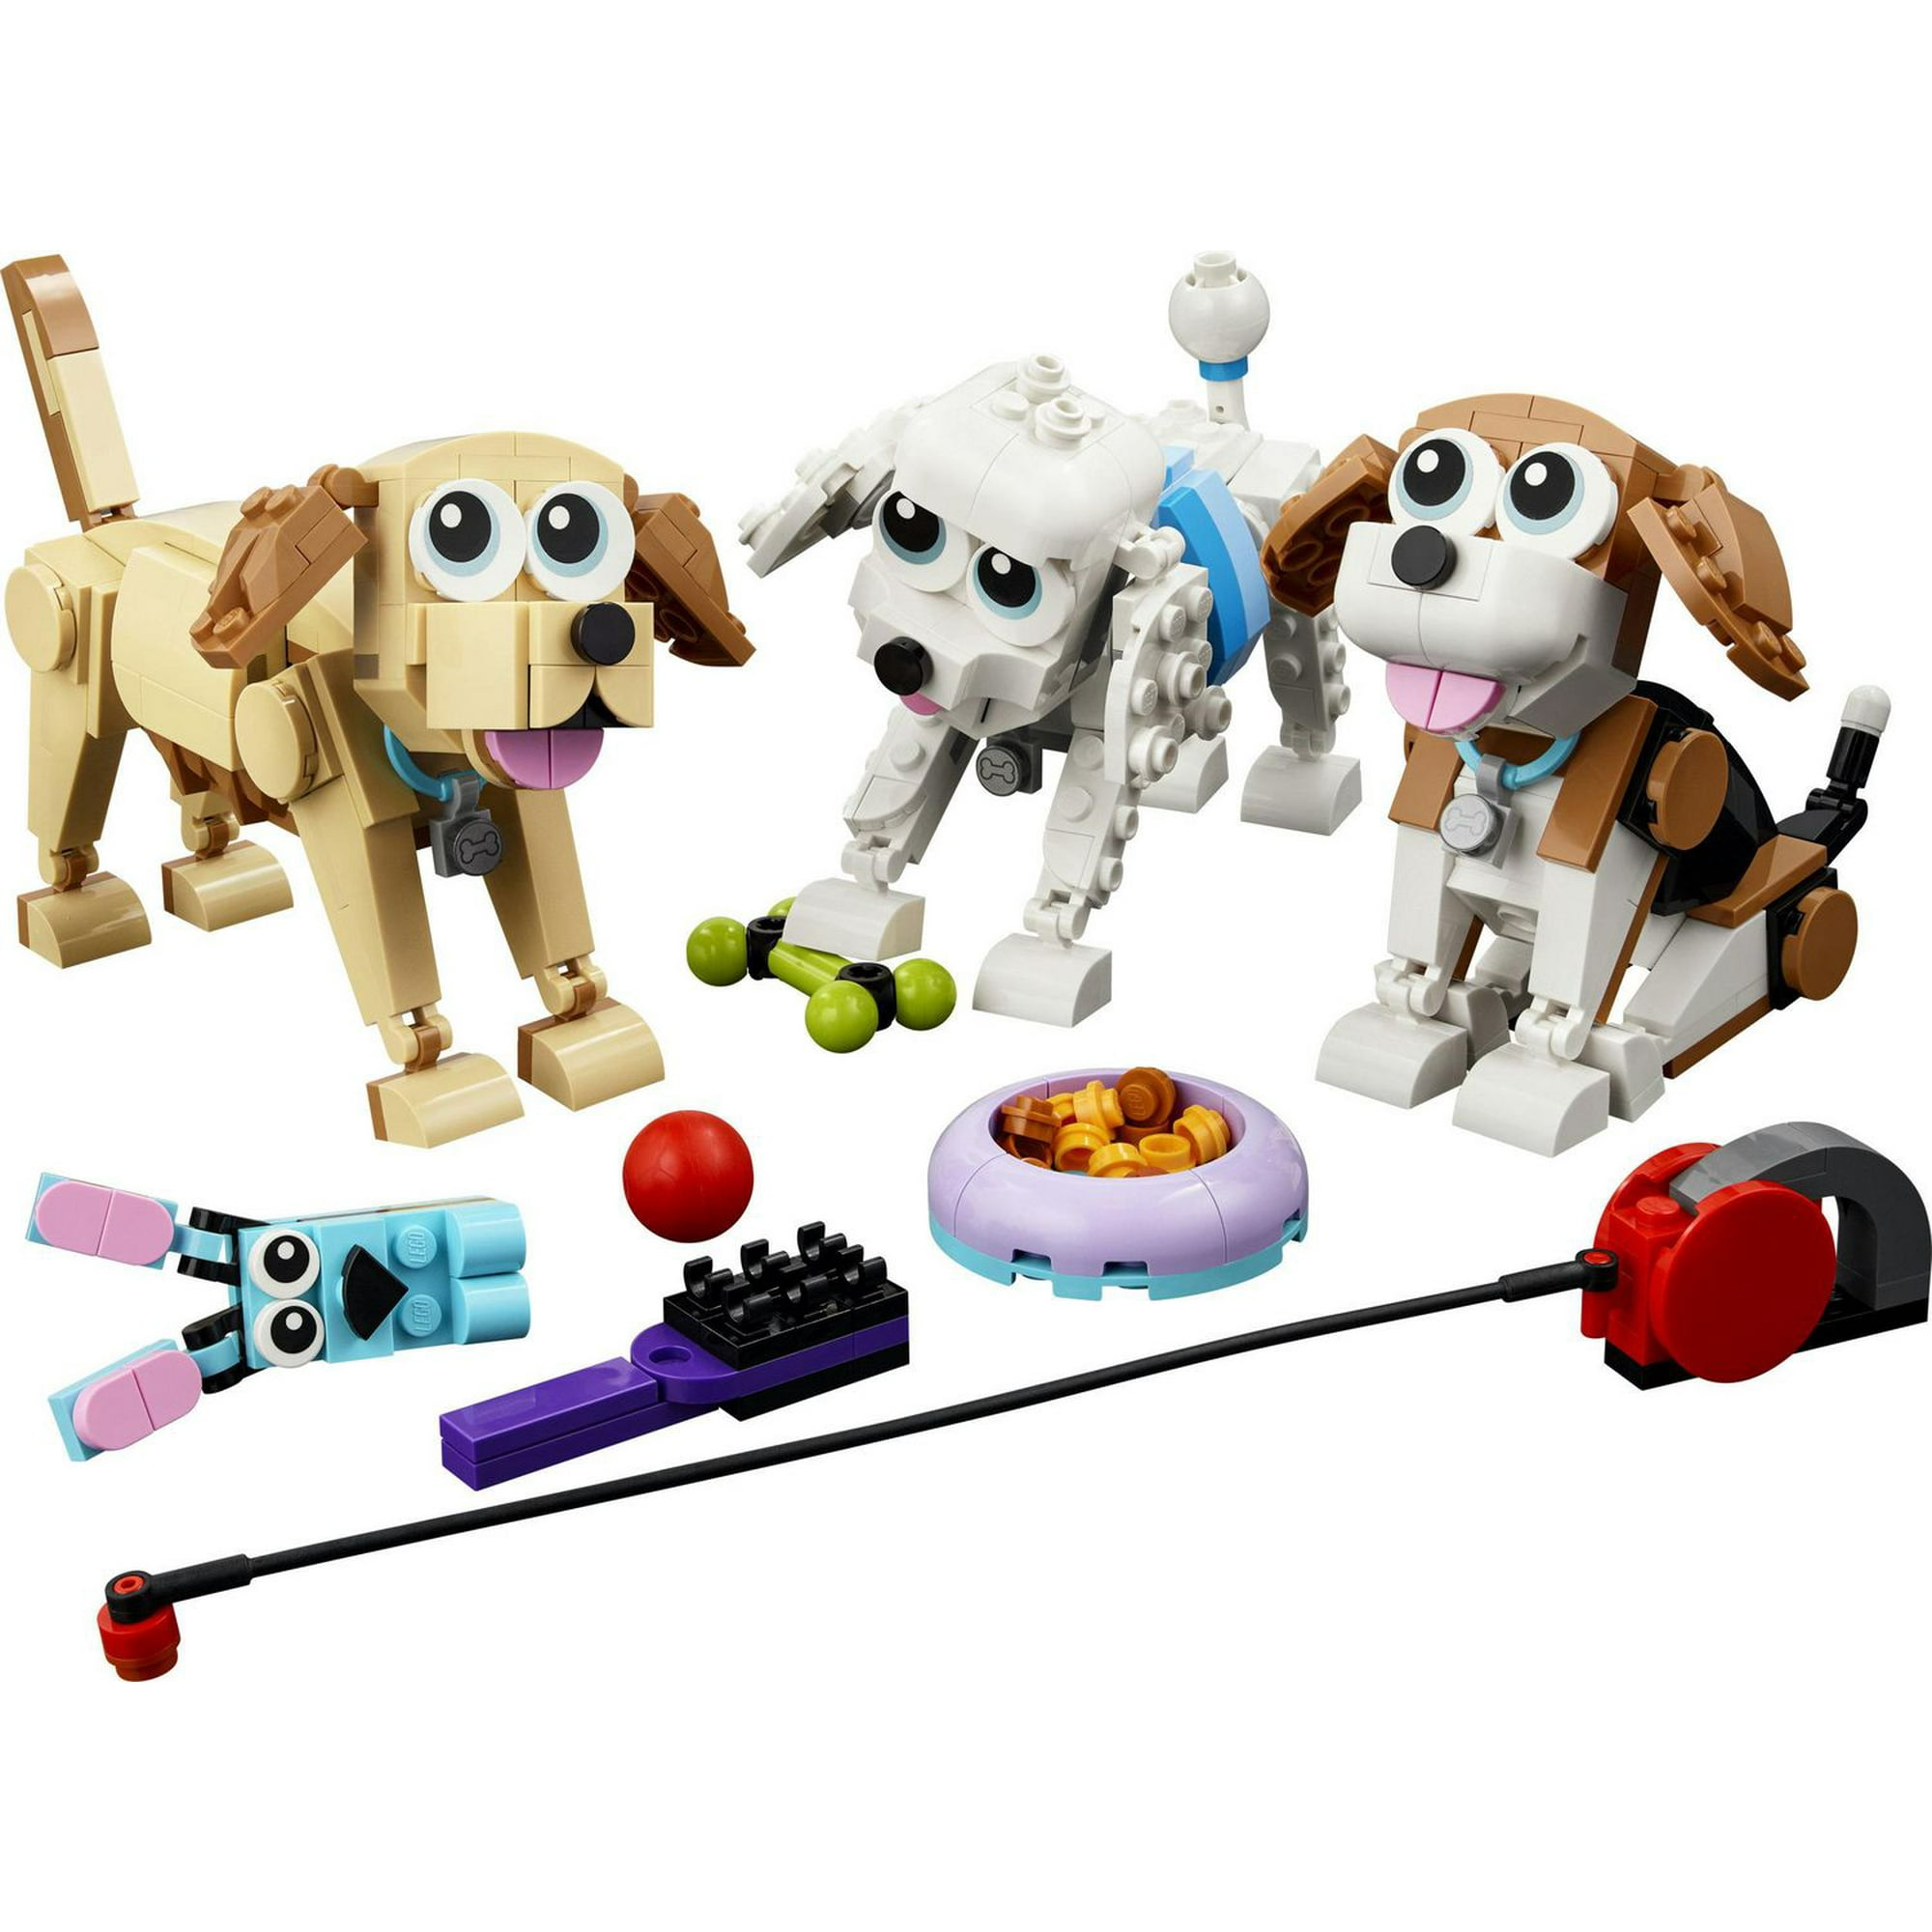 Not Sure Which Toys to Buy? Check Out the Kmart Fab 15 Toys List